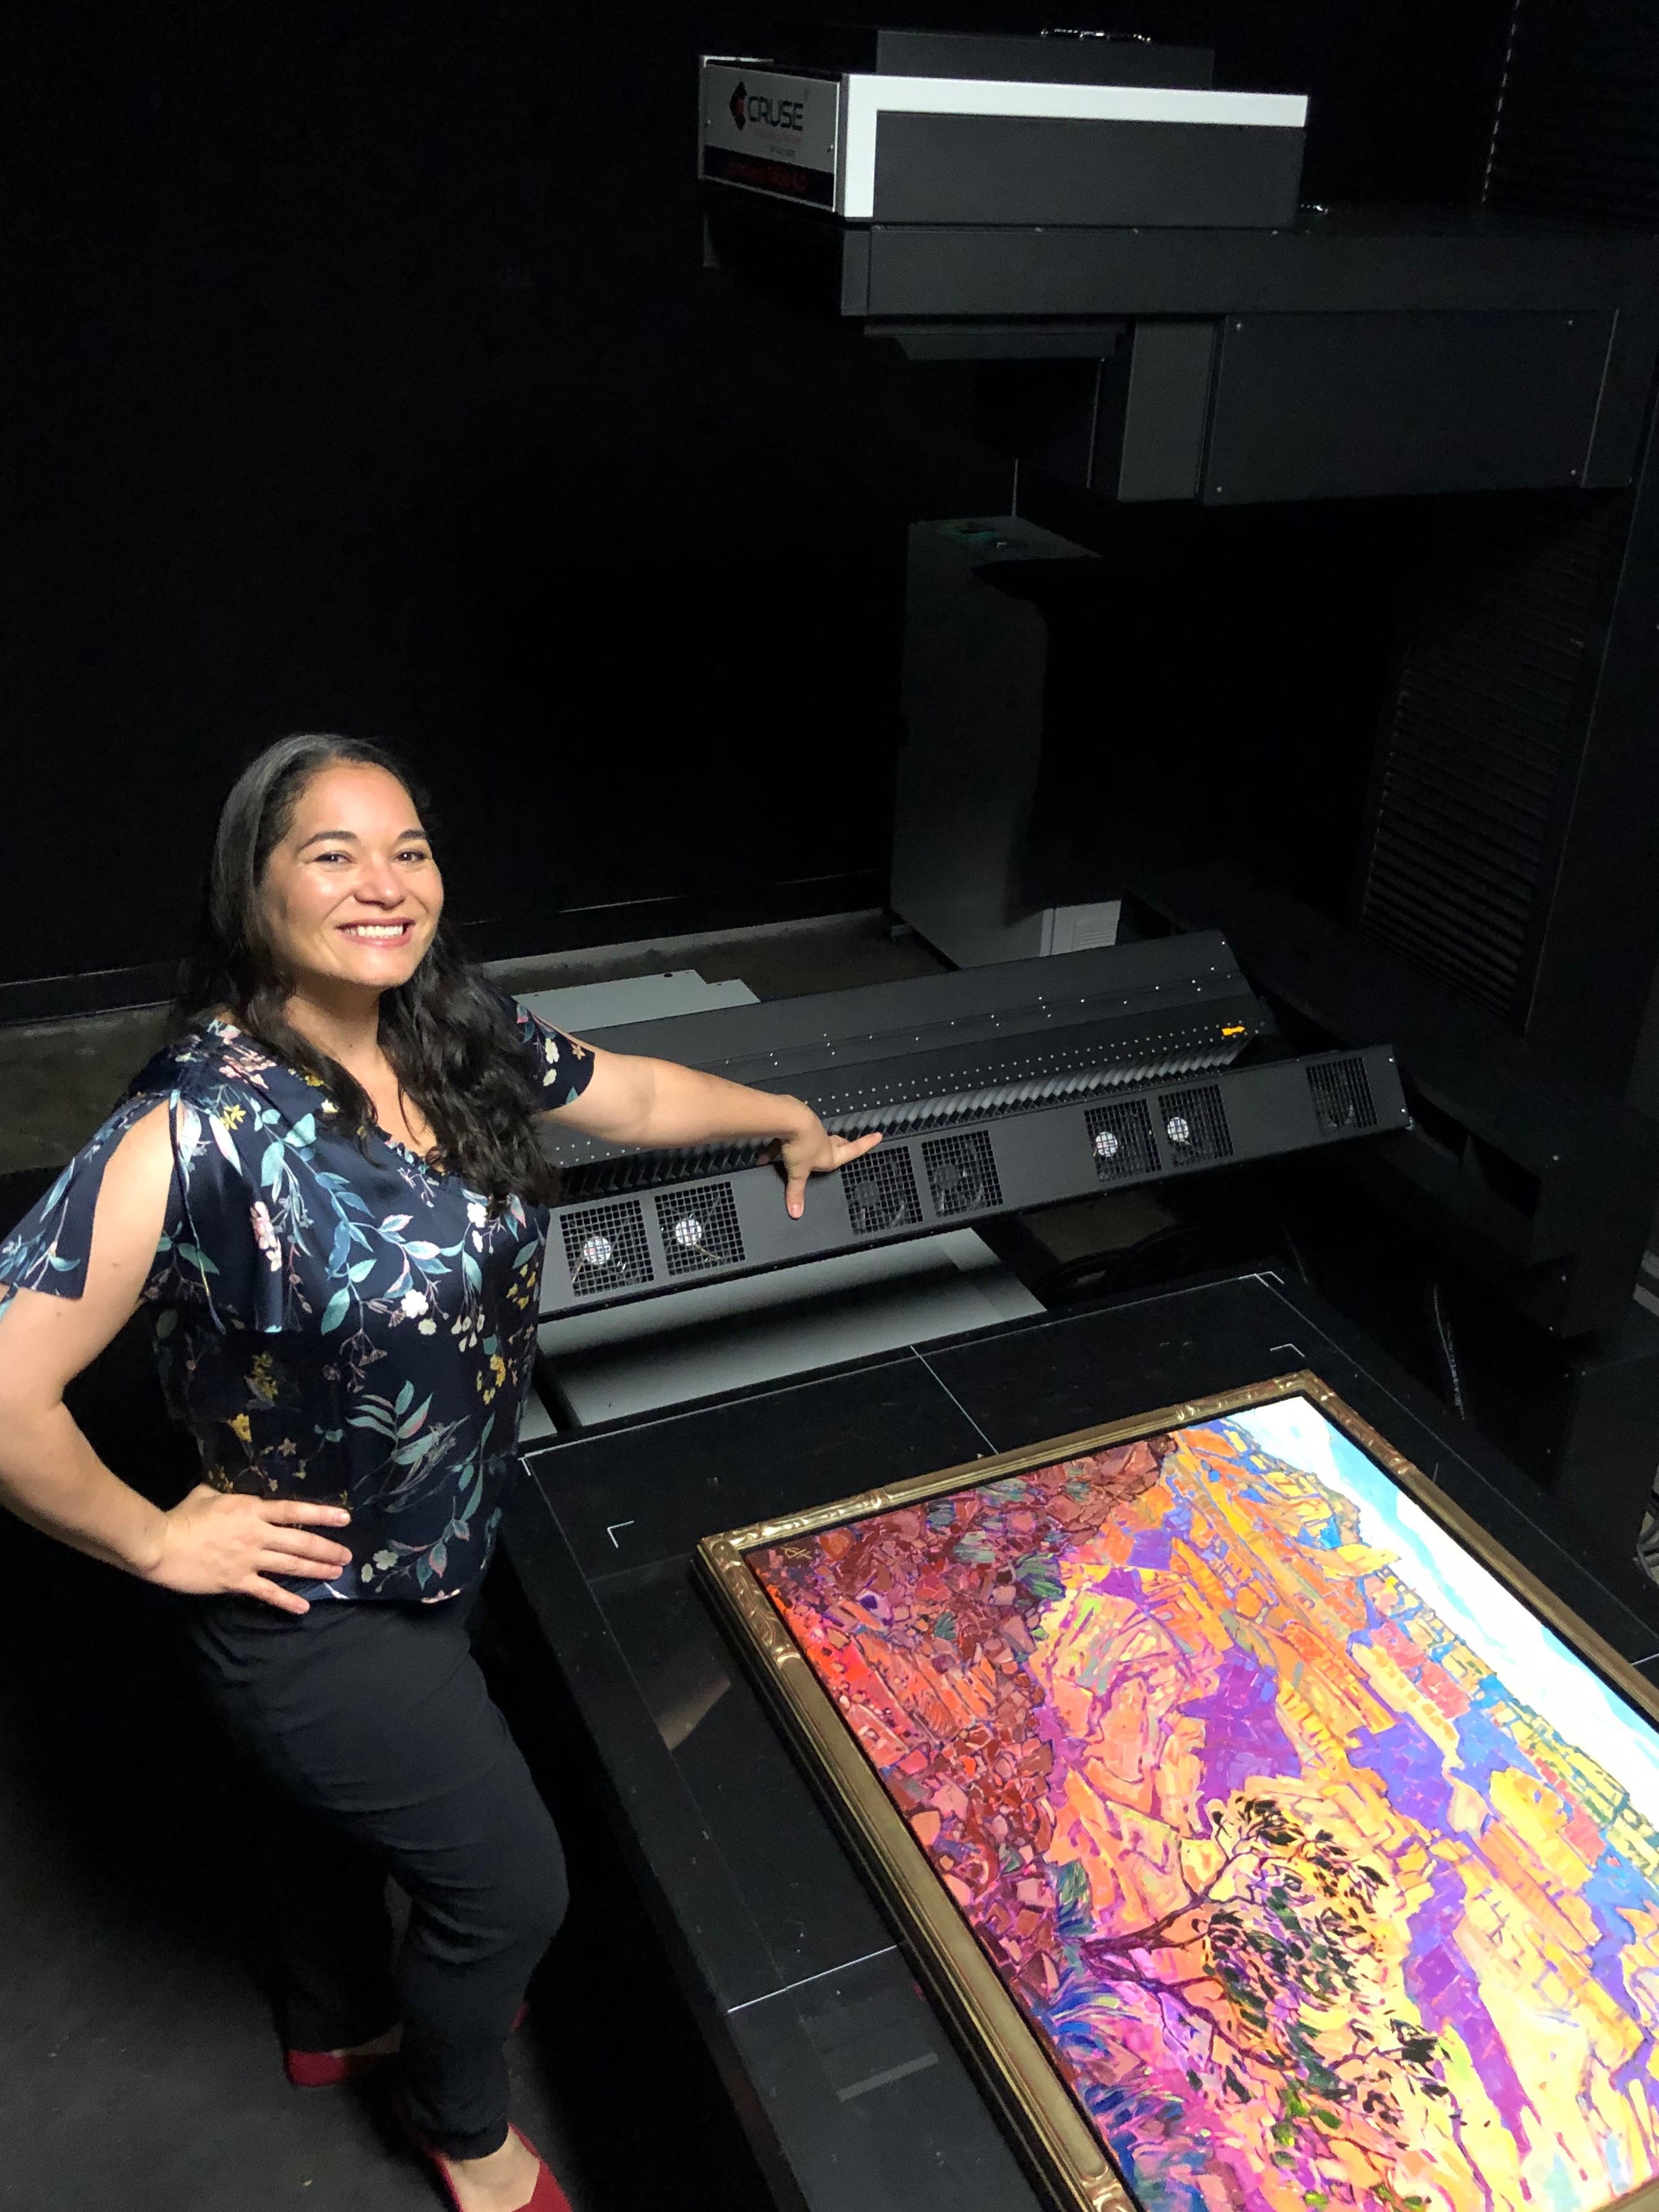 Erin Hanson scanning a painting for 3D printing